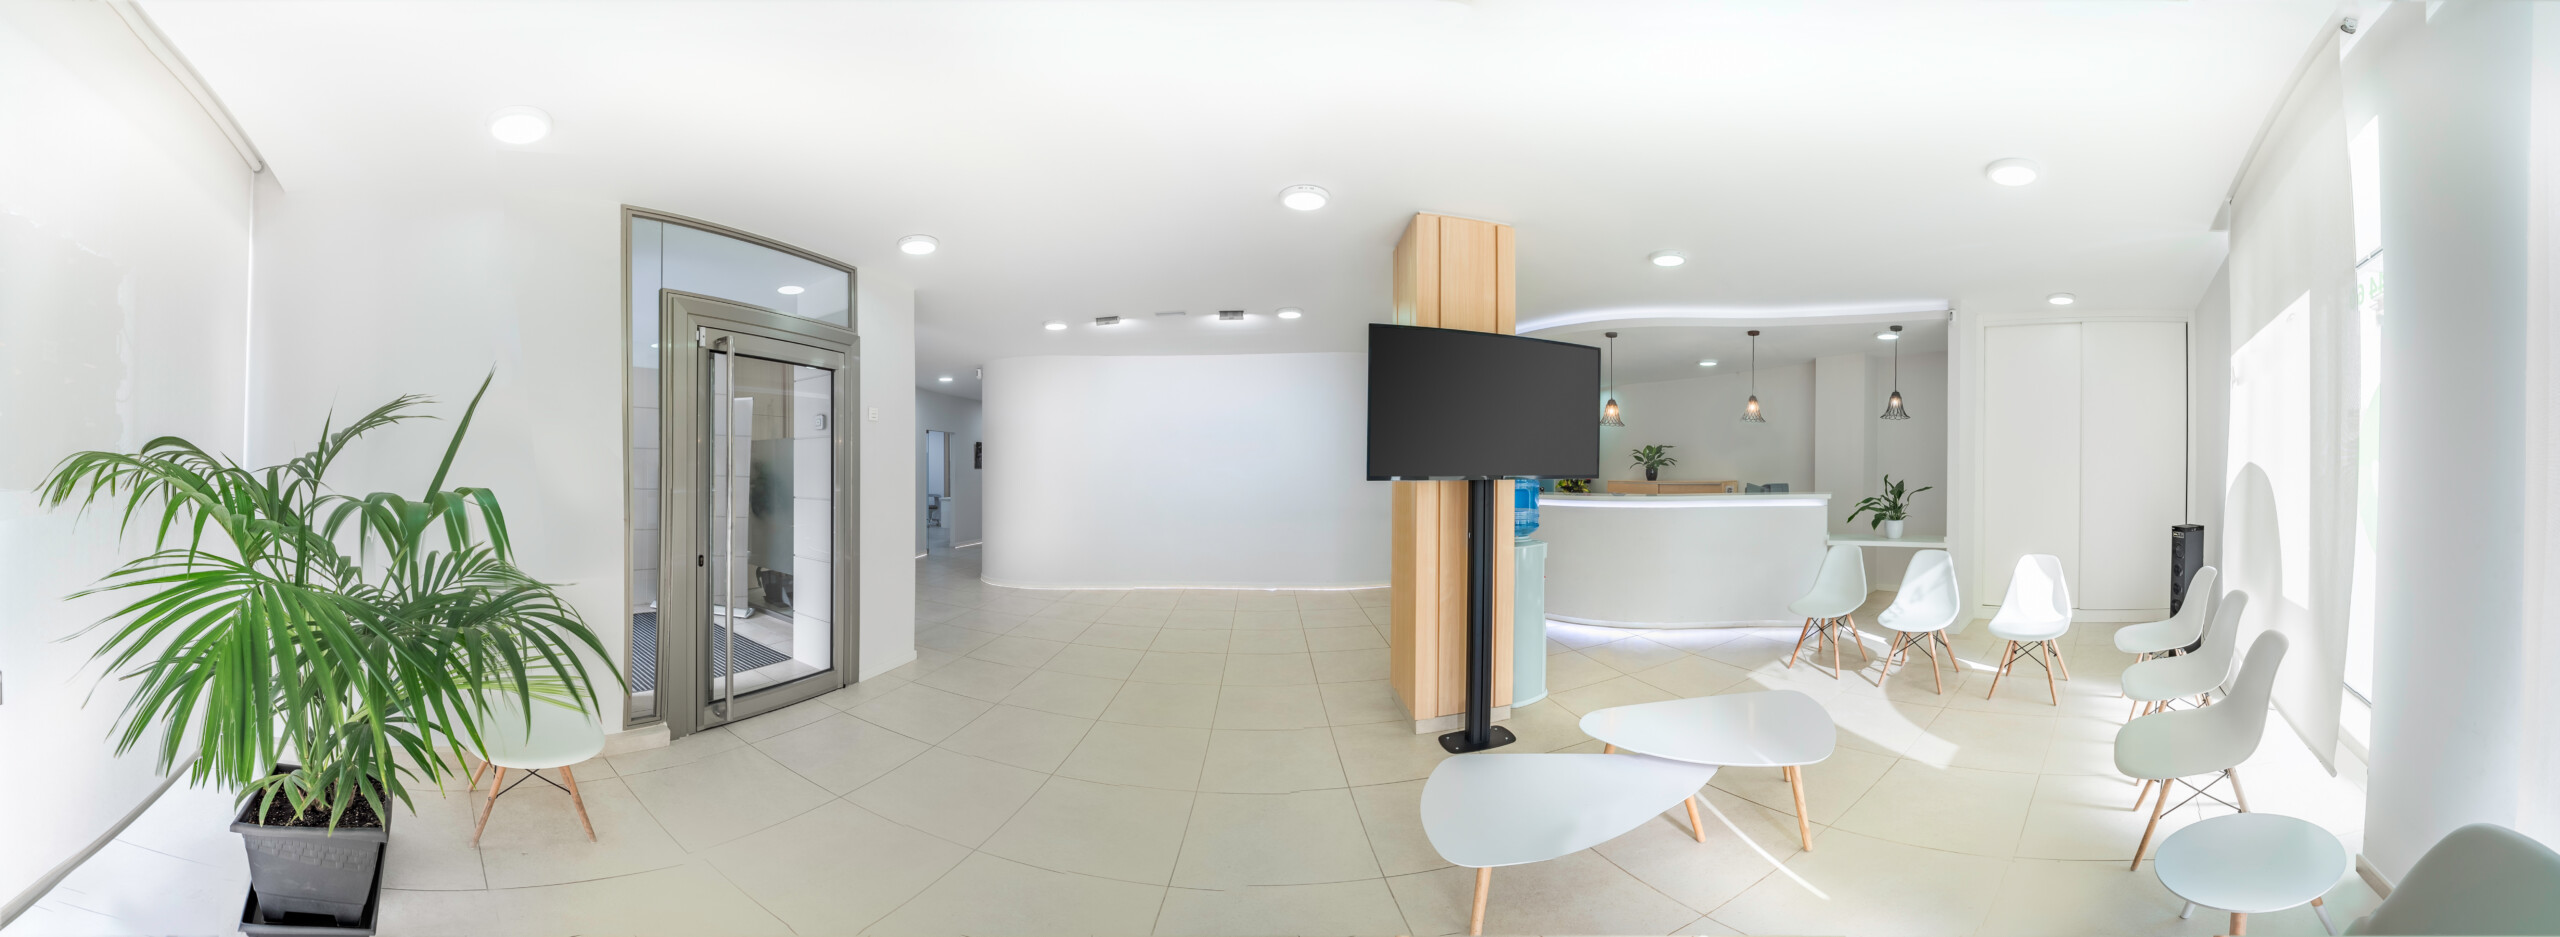 Panorama of a bright reception and waiting room in a clinic with